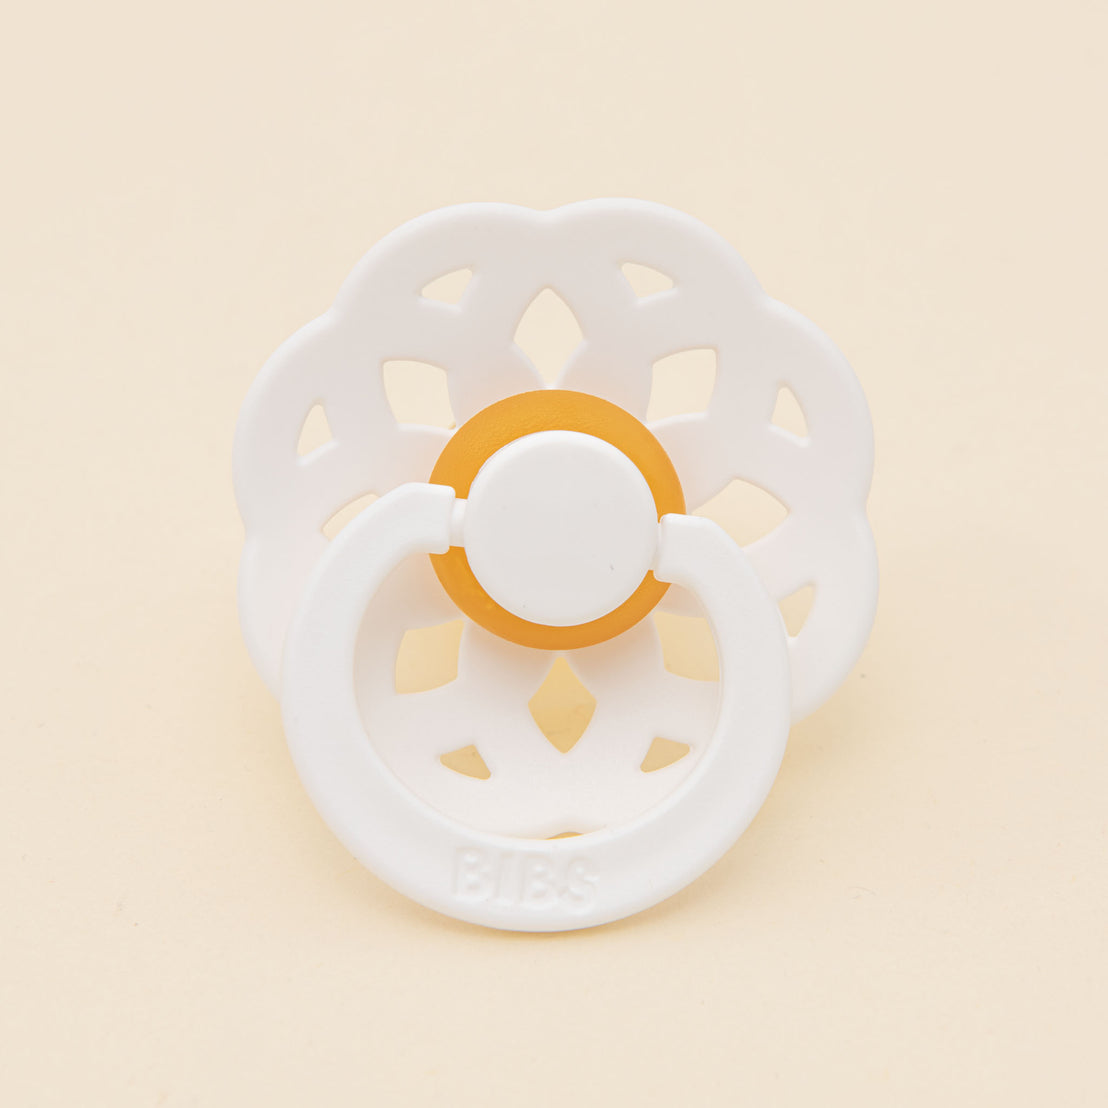 White Mila Pacifier with a round shield, featuring a delicate perforated design, resting on a pale yellow background.